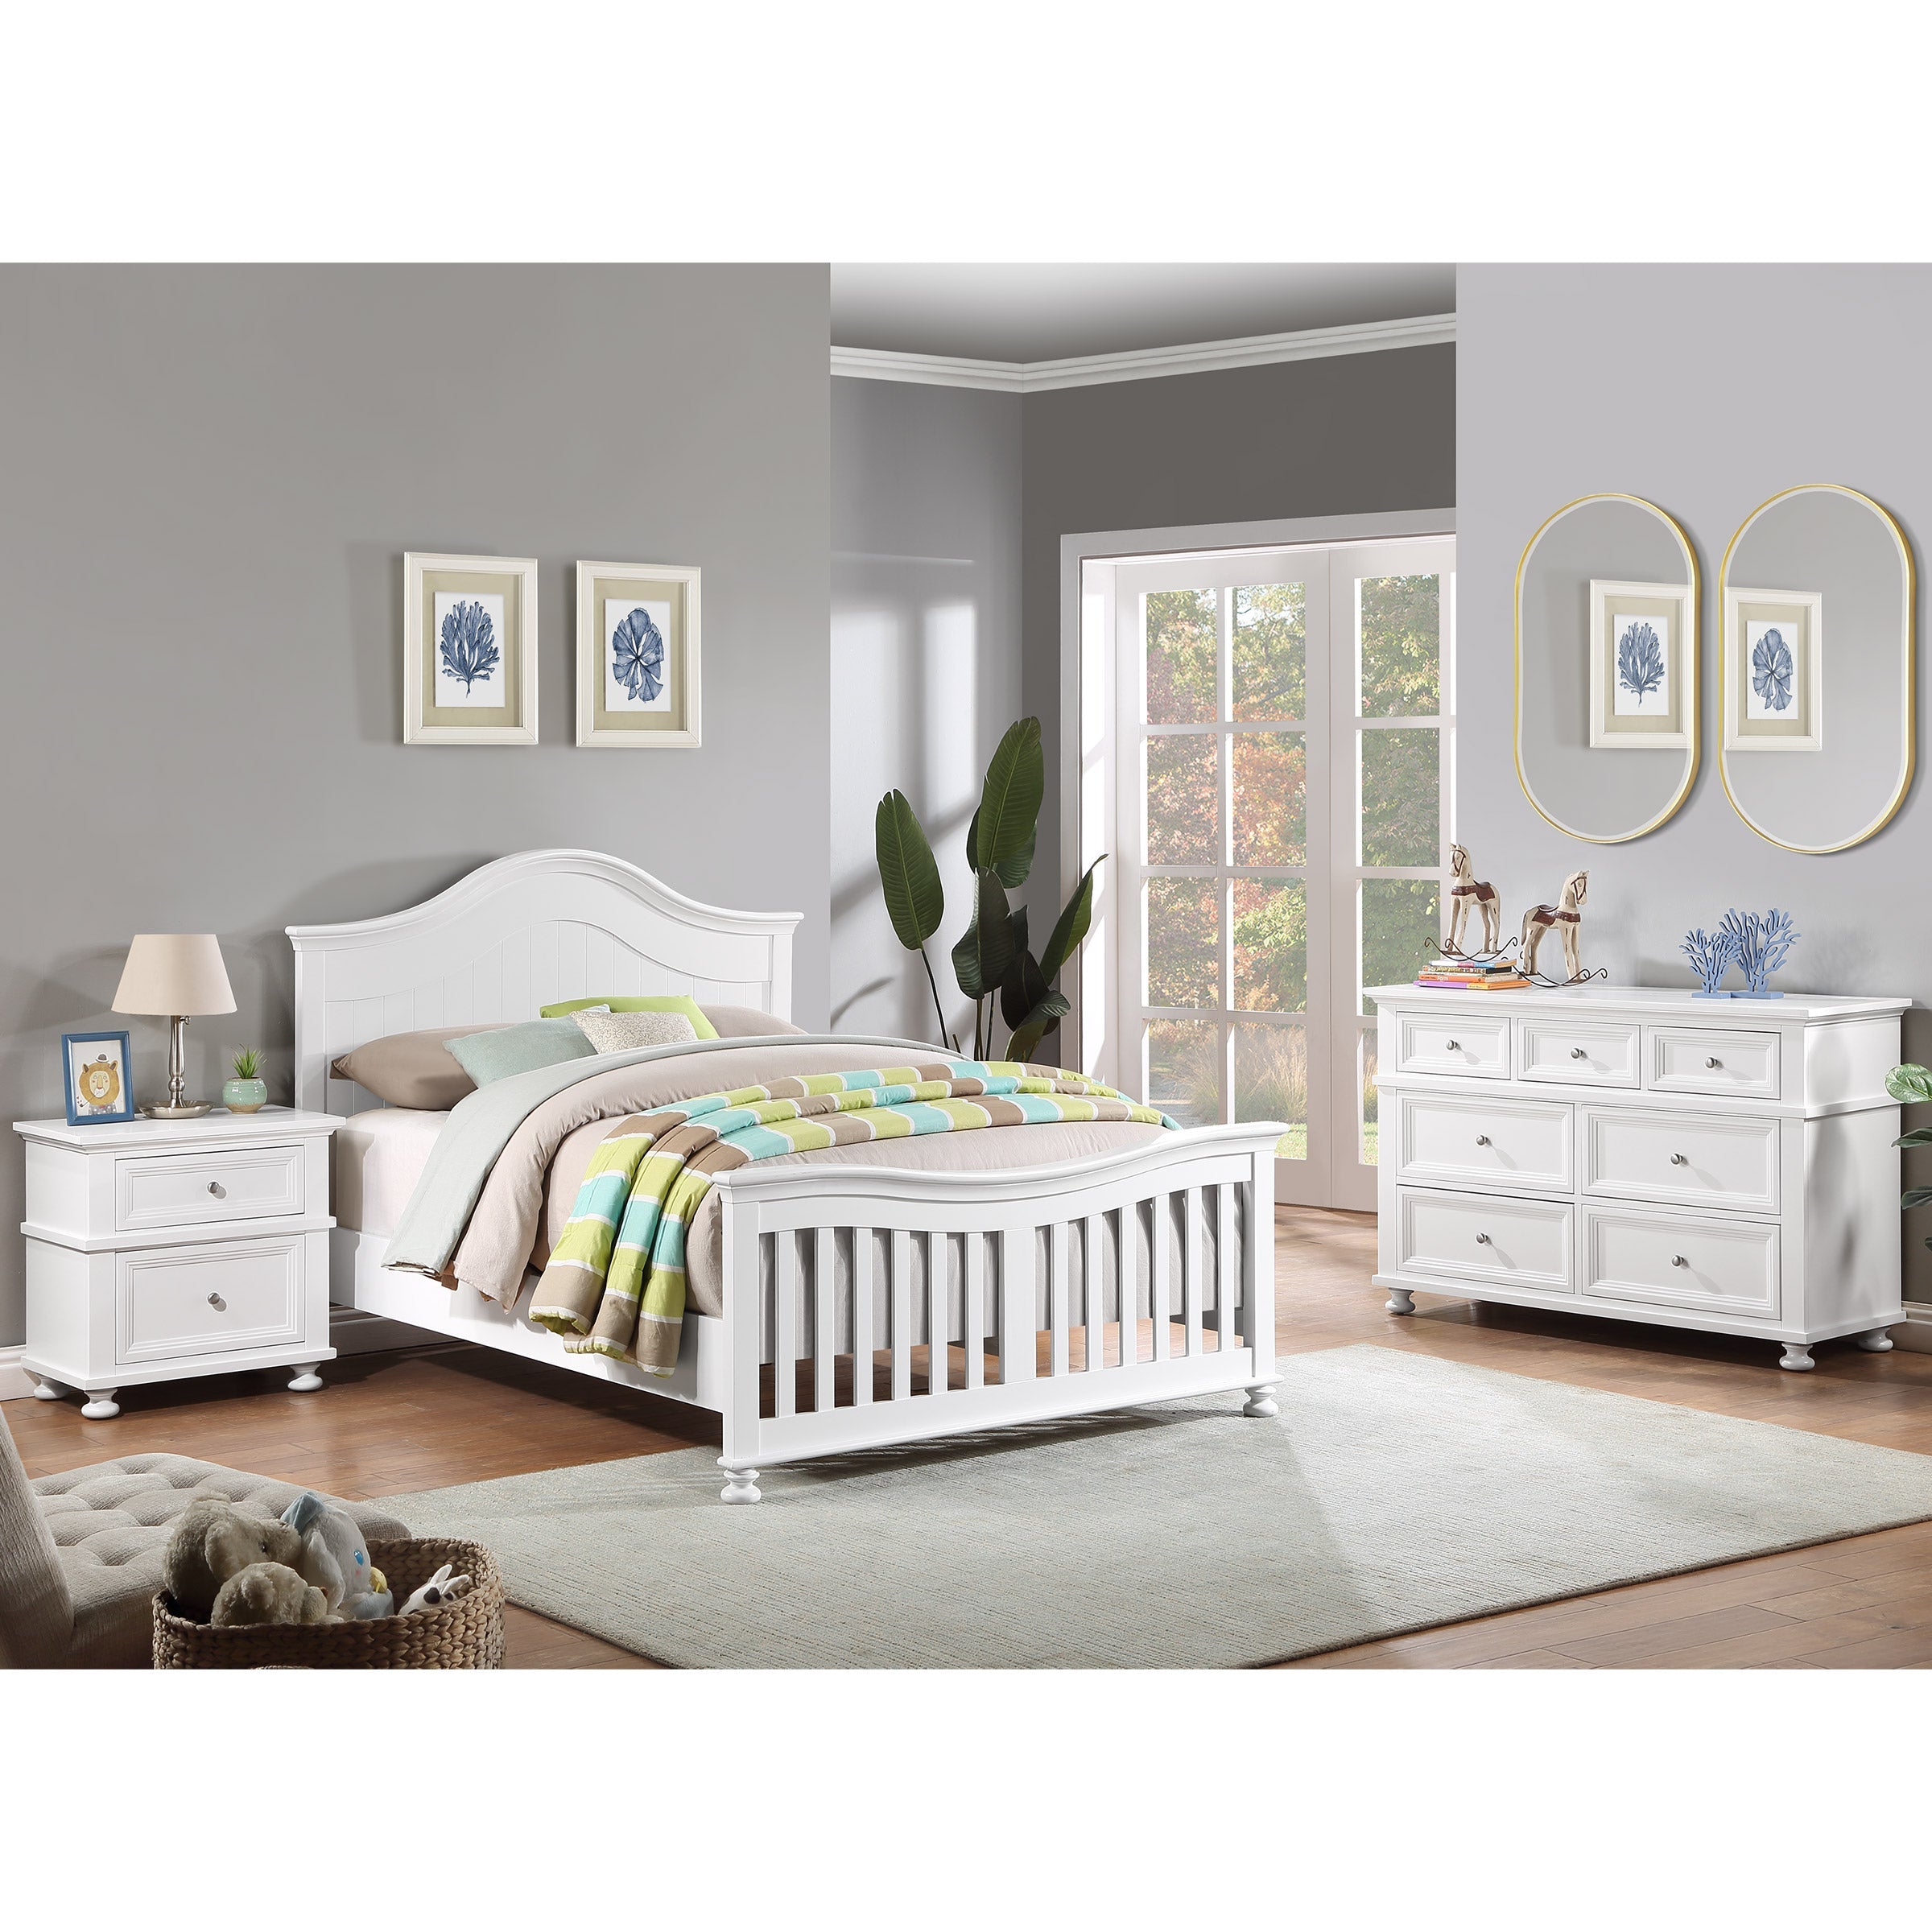 Carlie Youth Bedroom Collection